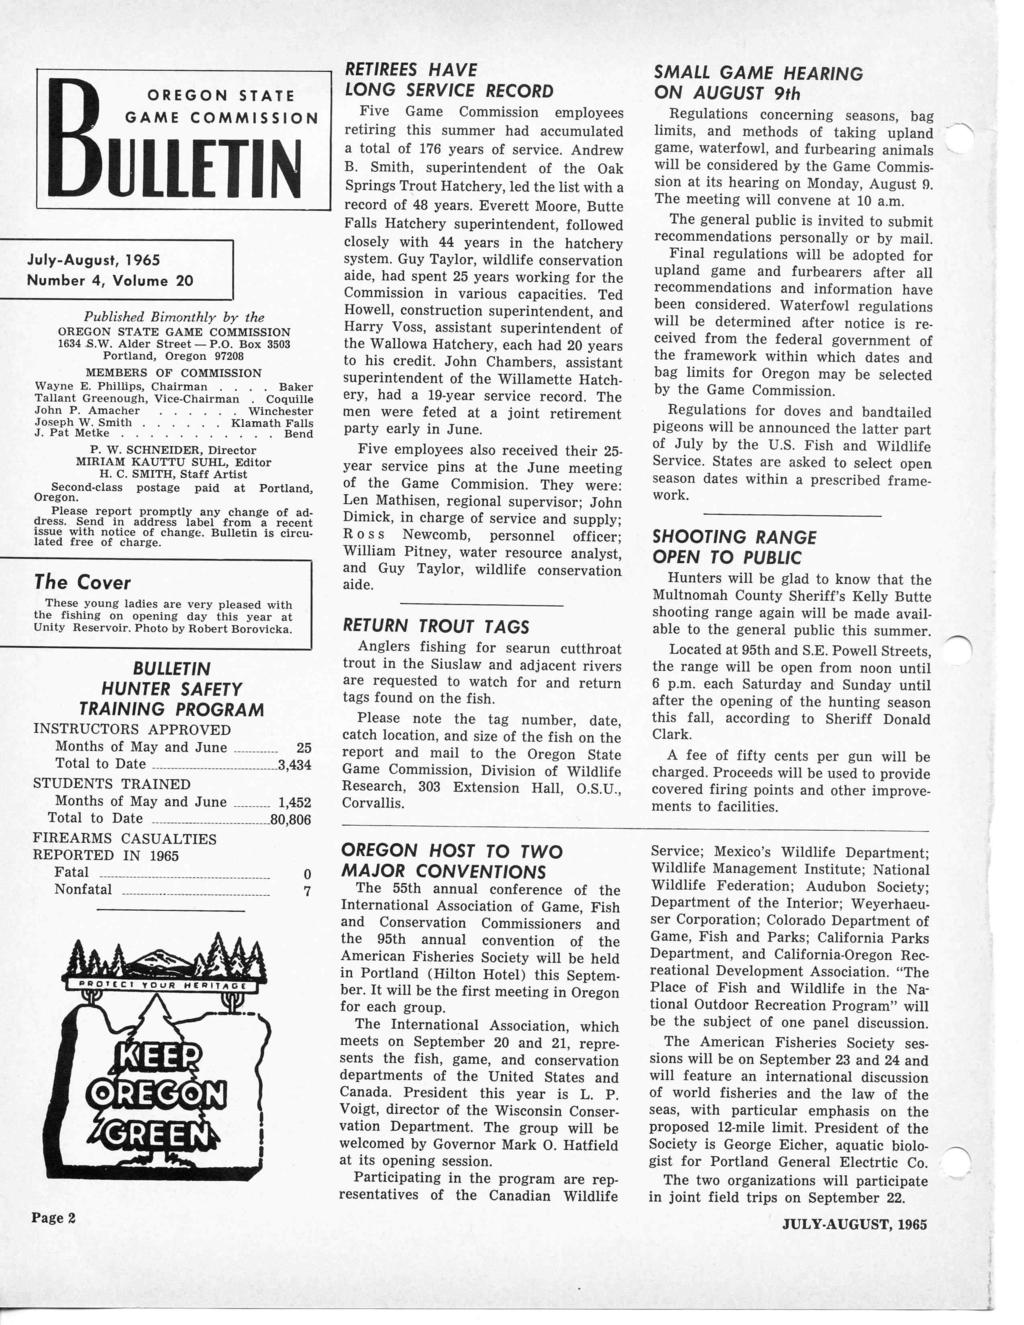 OREGON STATE GAME COMMSSON ULETN July-August, 1965 Number 4, Volume 20 Publshed Bmonthly by the OREGON STATE GAME COMMSSON 1634 S.W. Alder Street P.O. Box 3503 Portland, Oregon 97208 MEMBERS OF COMMSSON Wayne E.